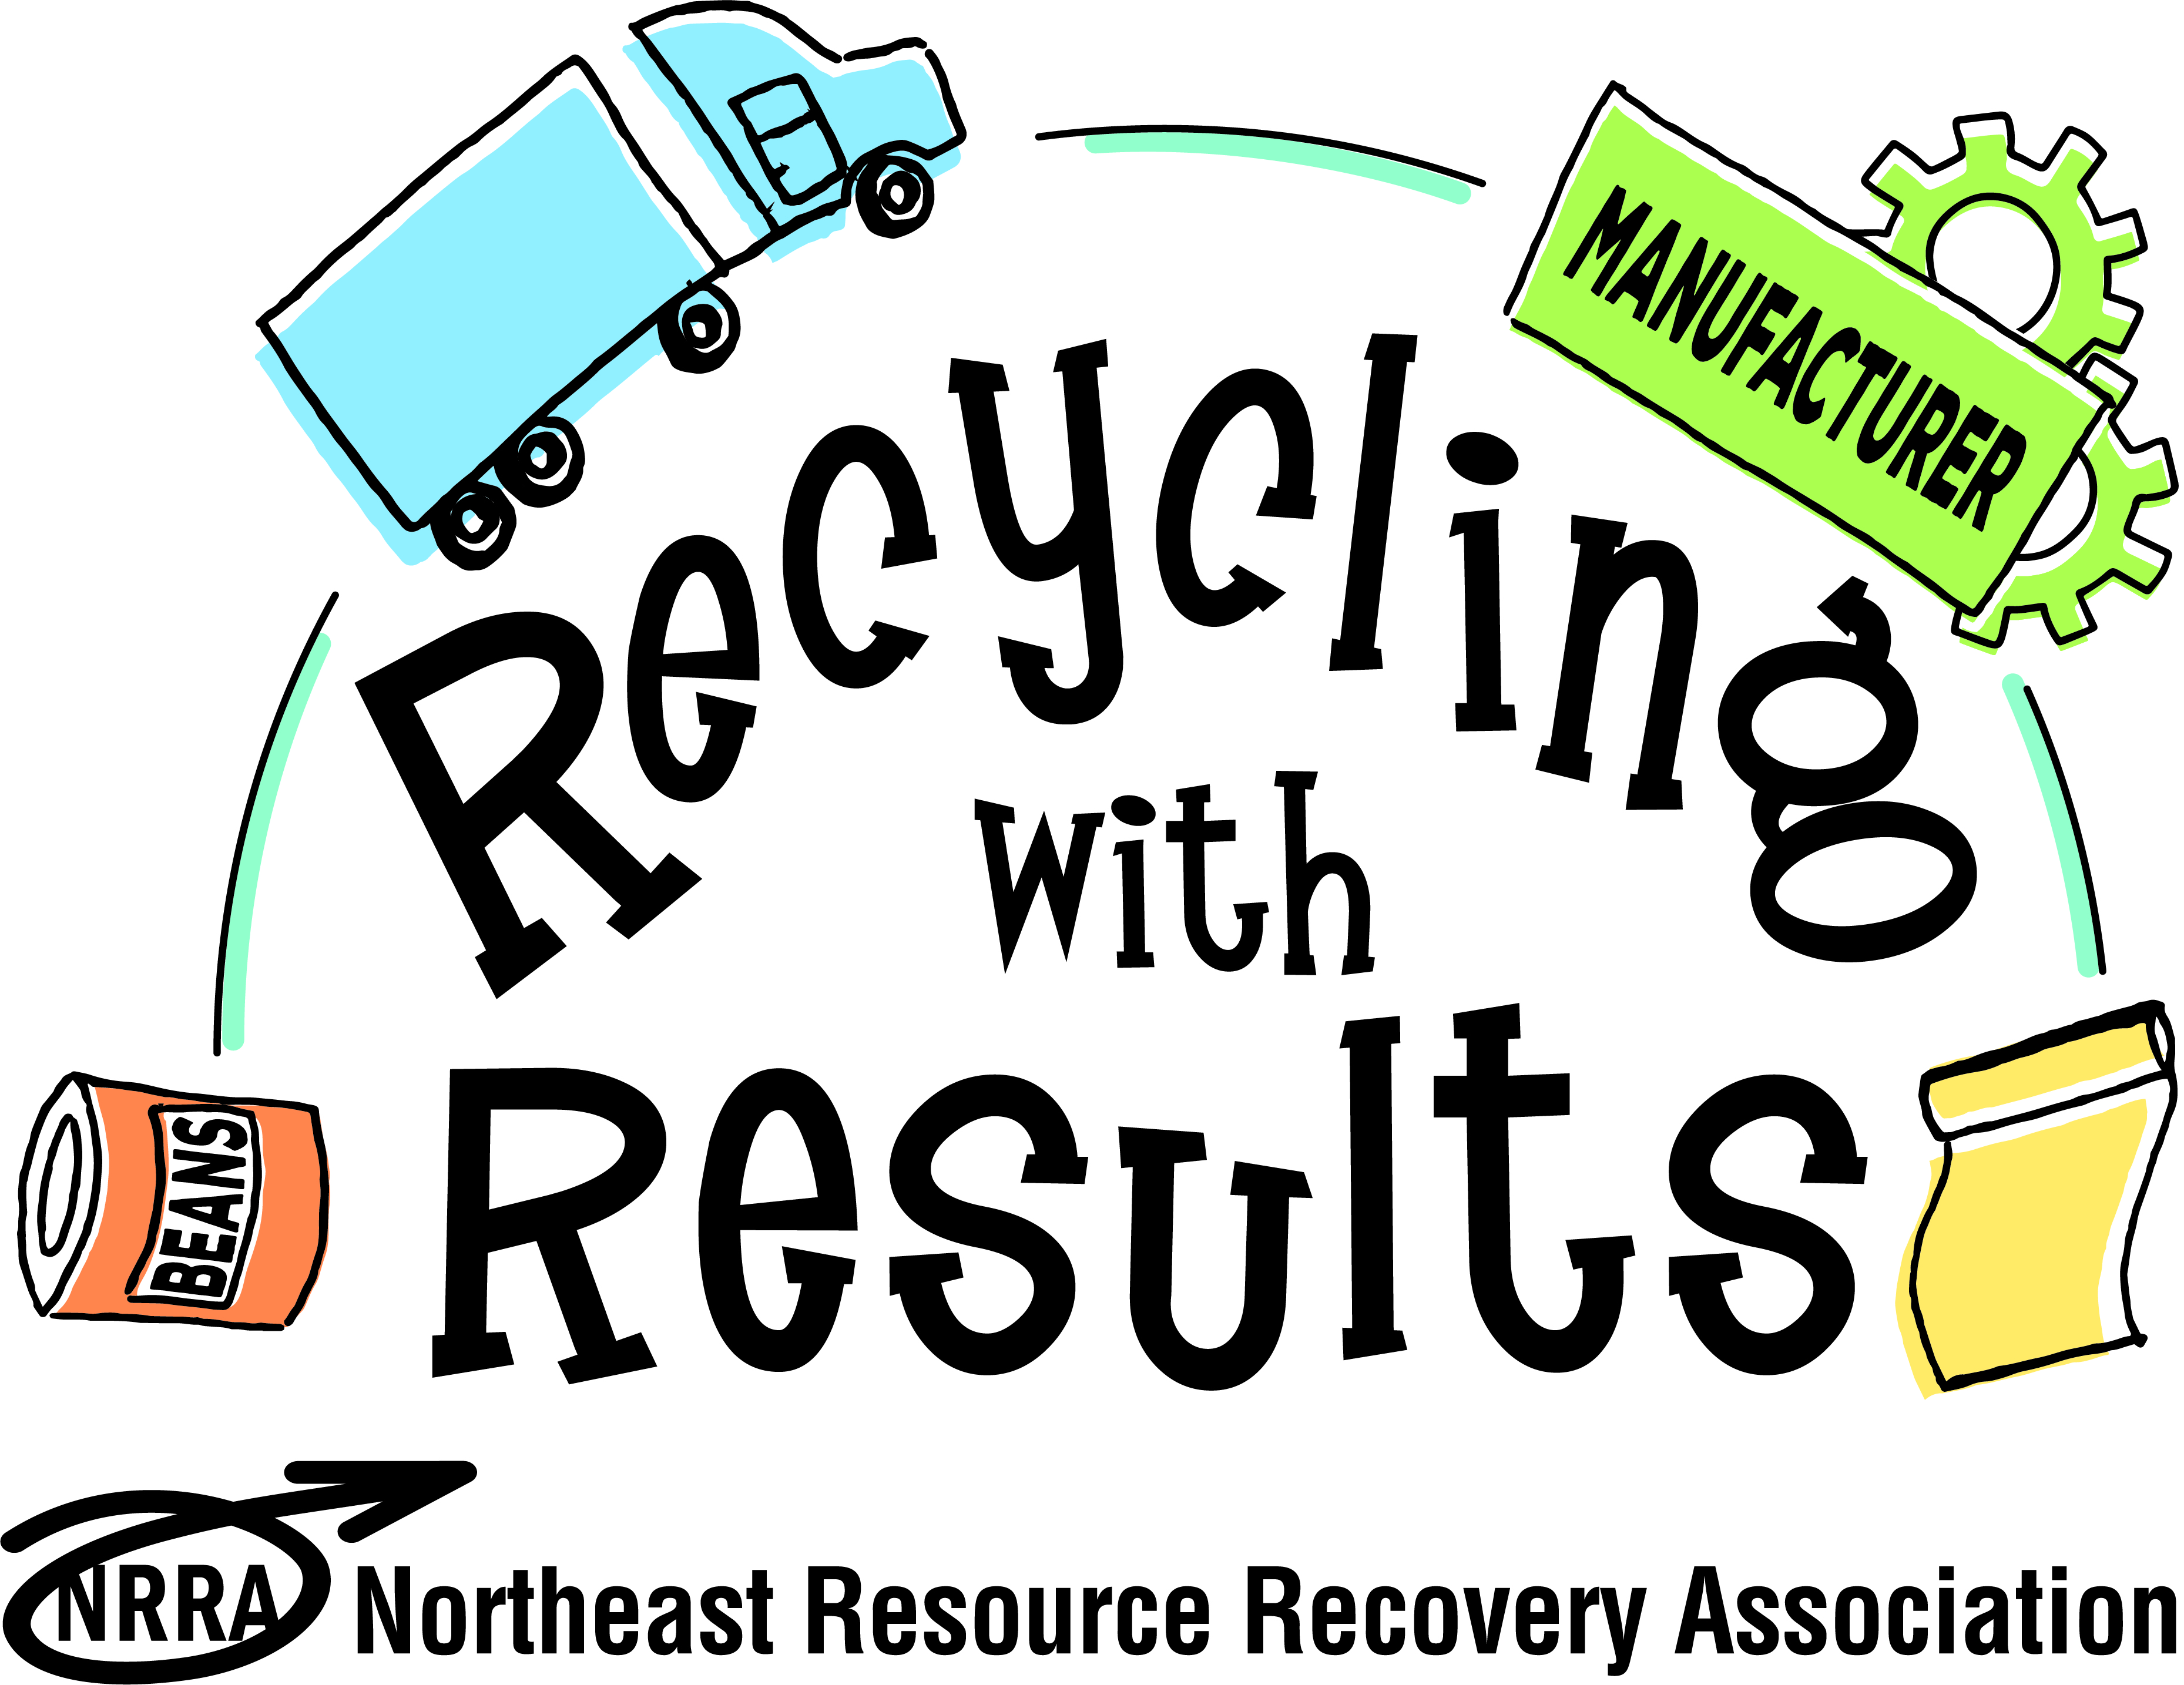 Recycling with Results